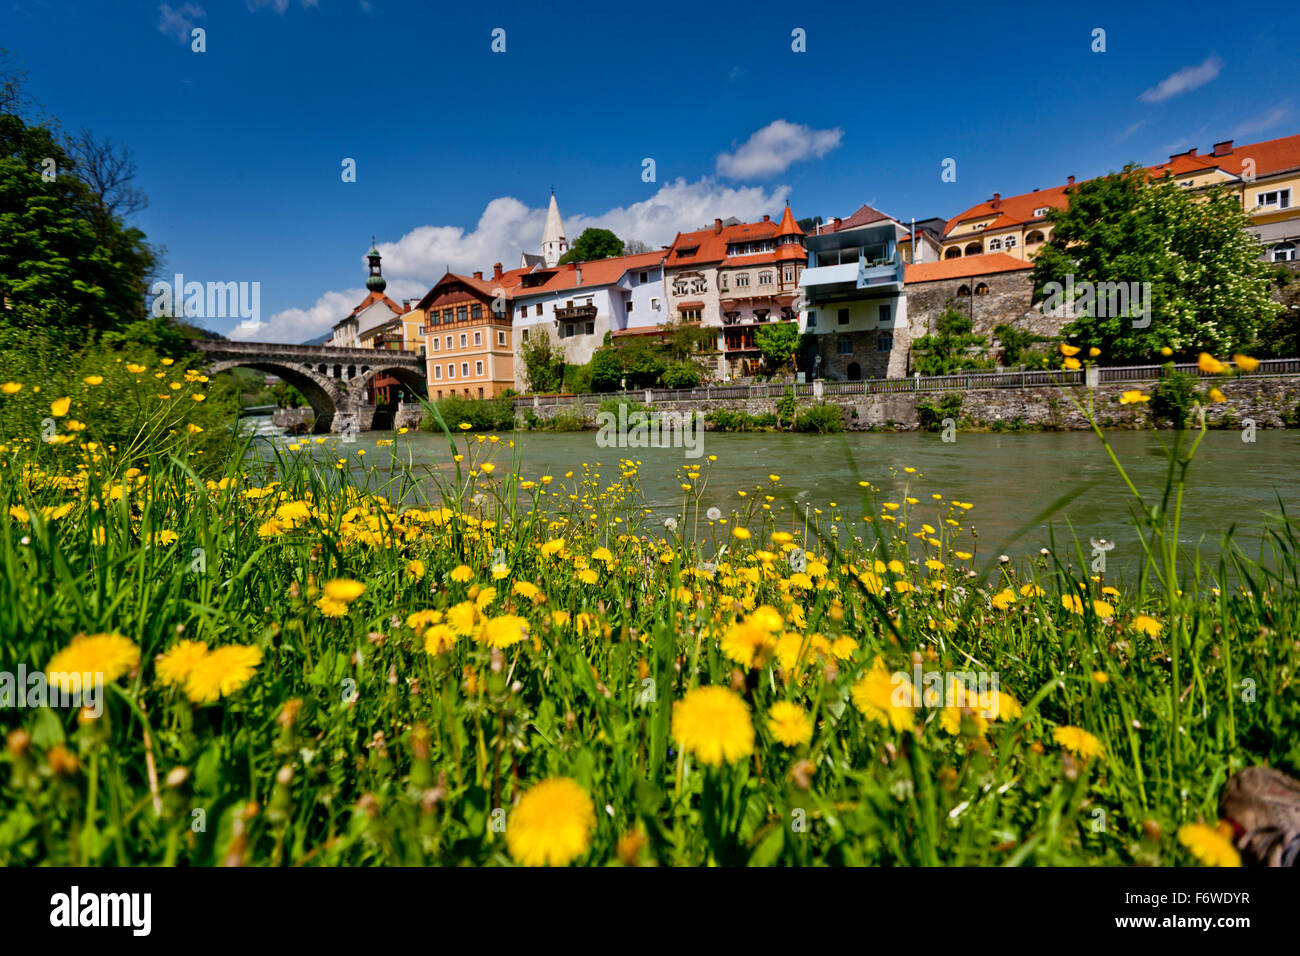 View over river Mur to old town, Murau, Styria, Austria Stock Photo